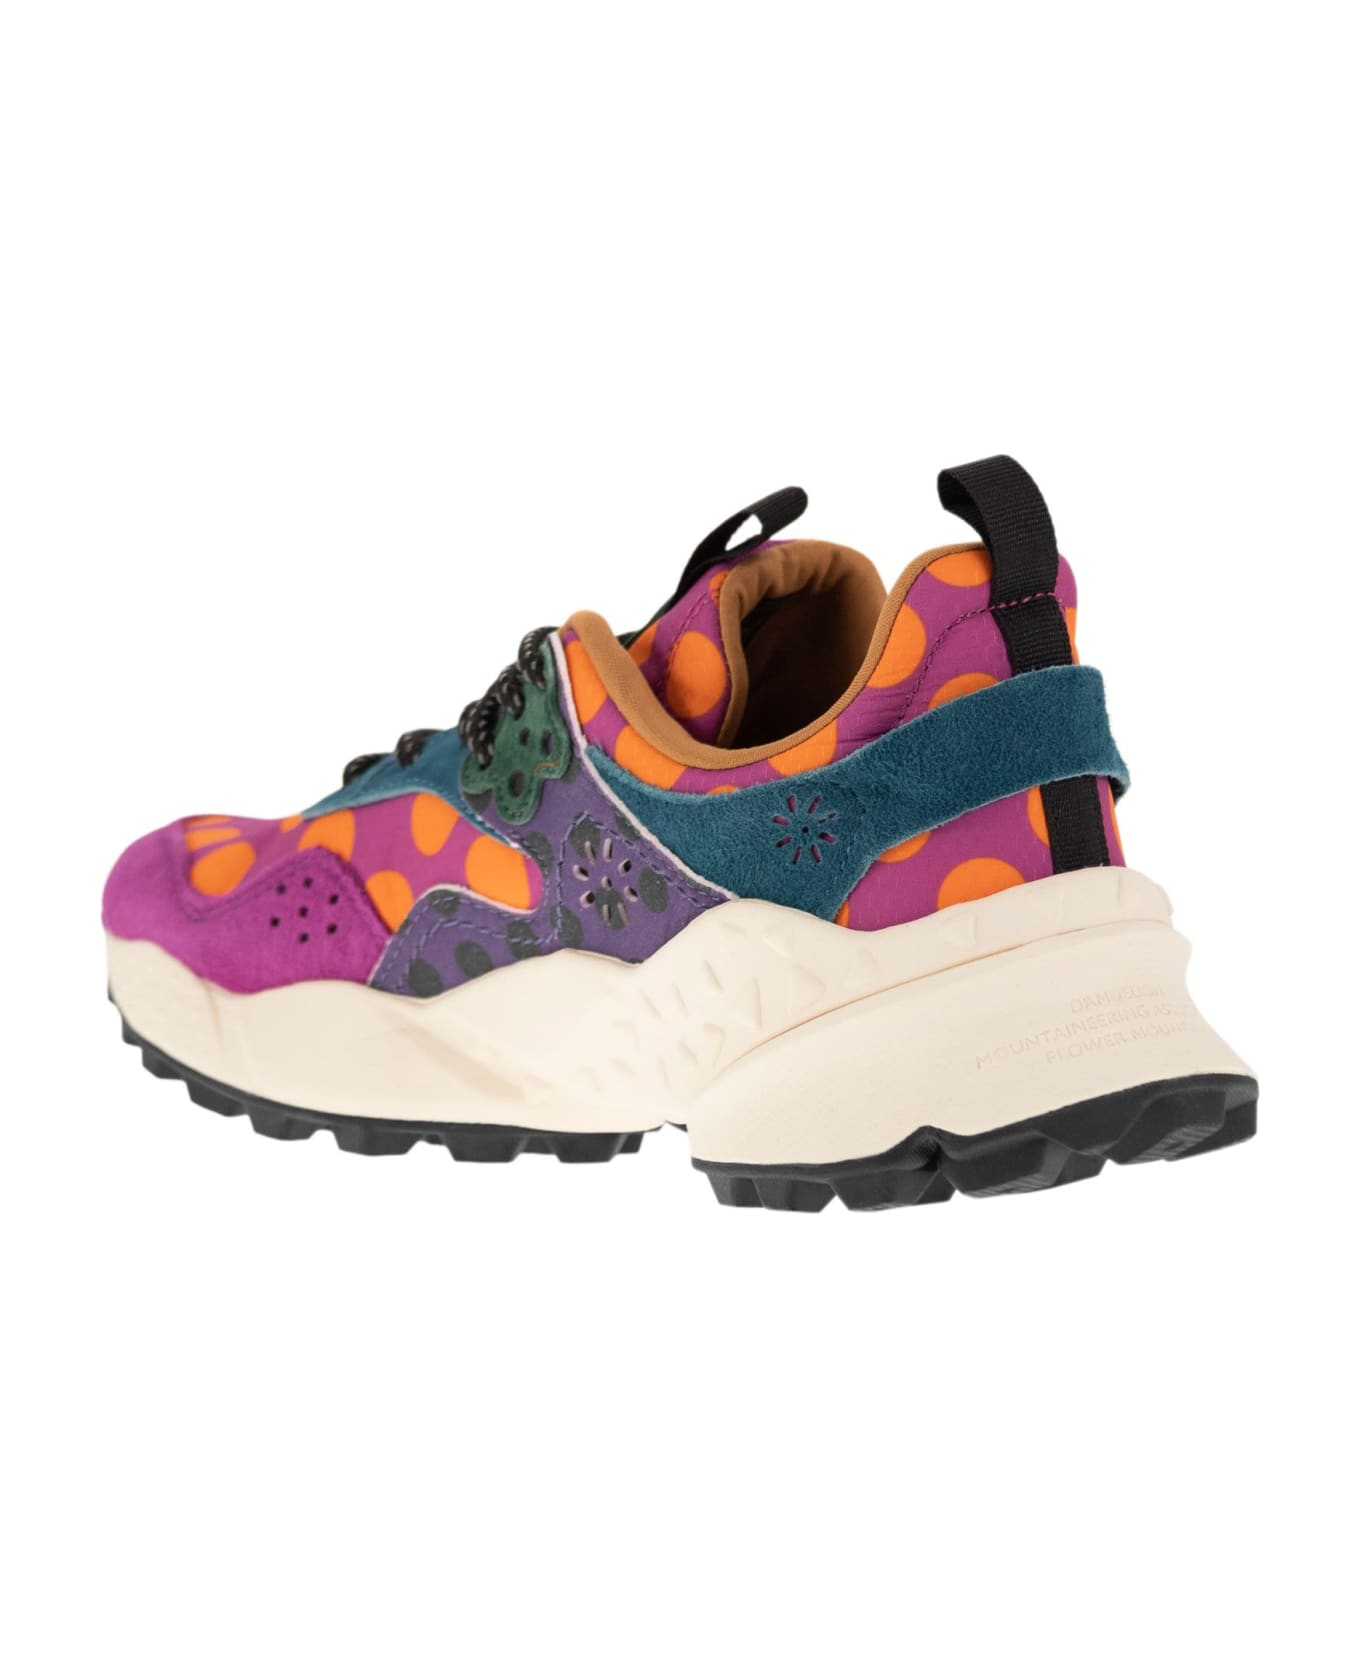 Flower Mountain Kotetsu - Sneakers In Suede And Technical Fabric - Multicolor スニーカー